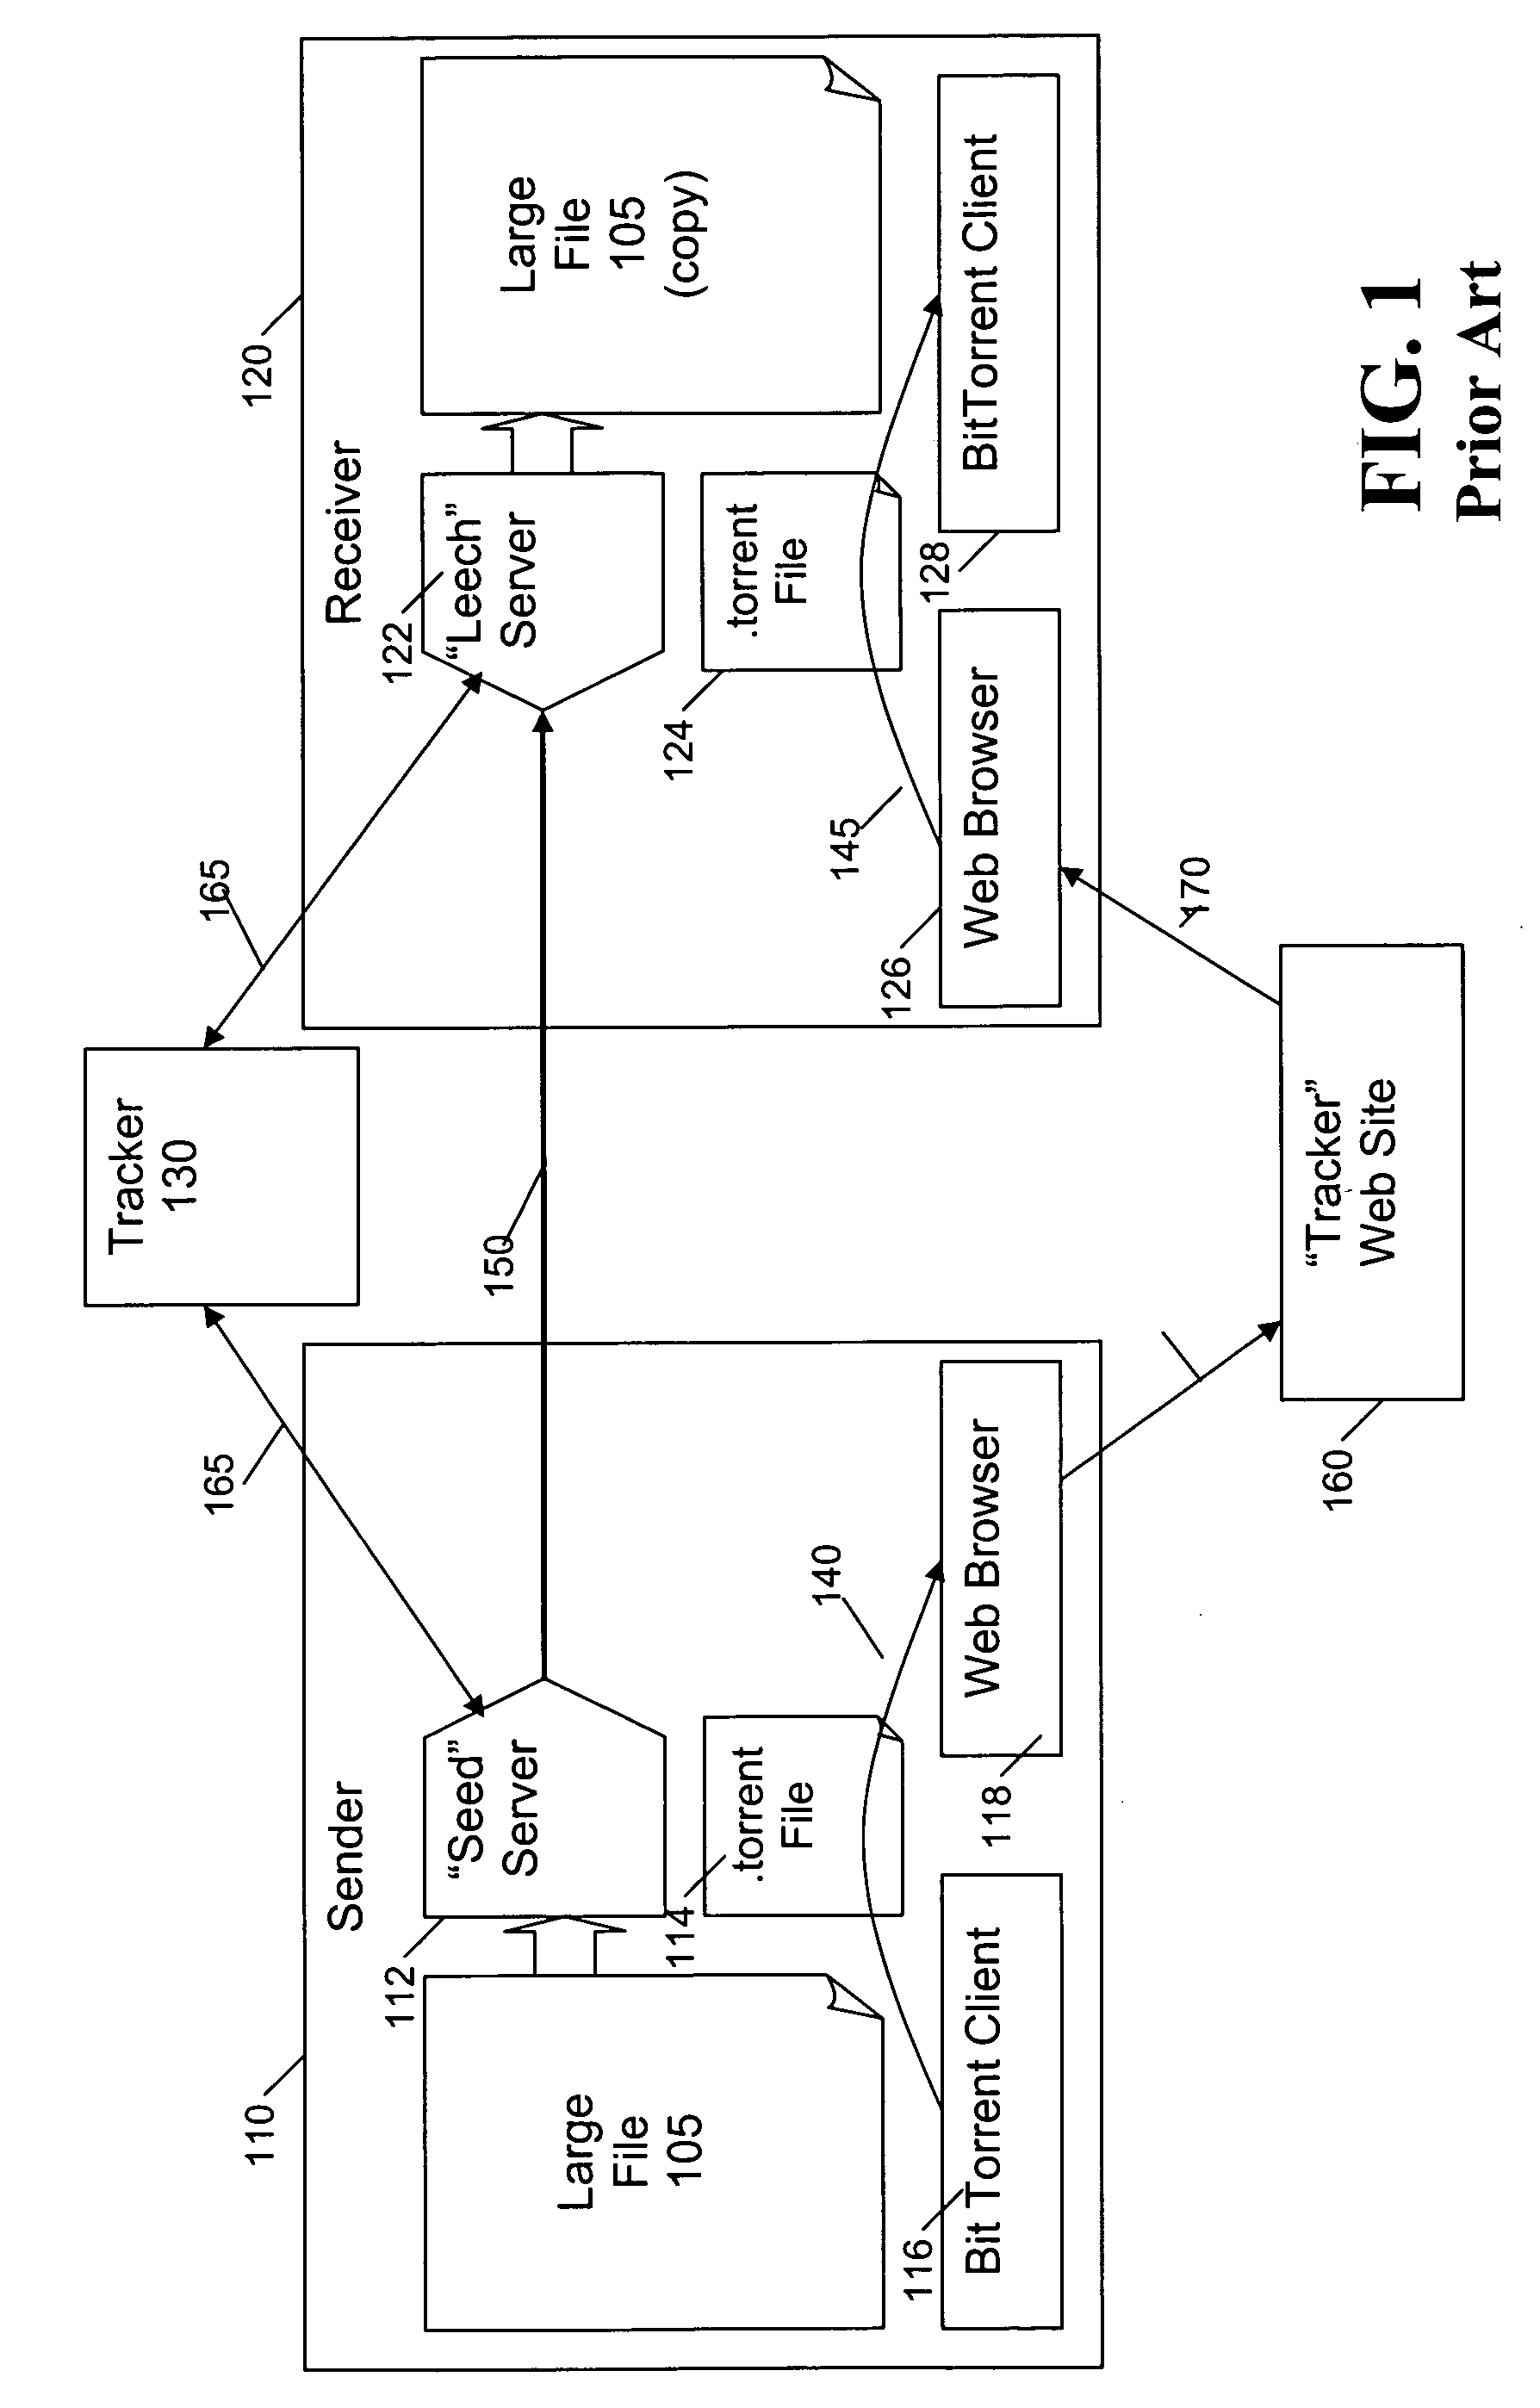 Method and apparatus for offline cooperative file distribution using cache nodes